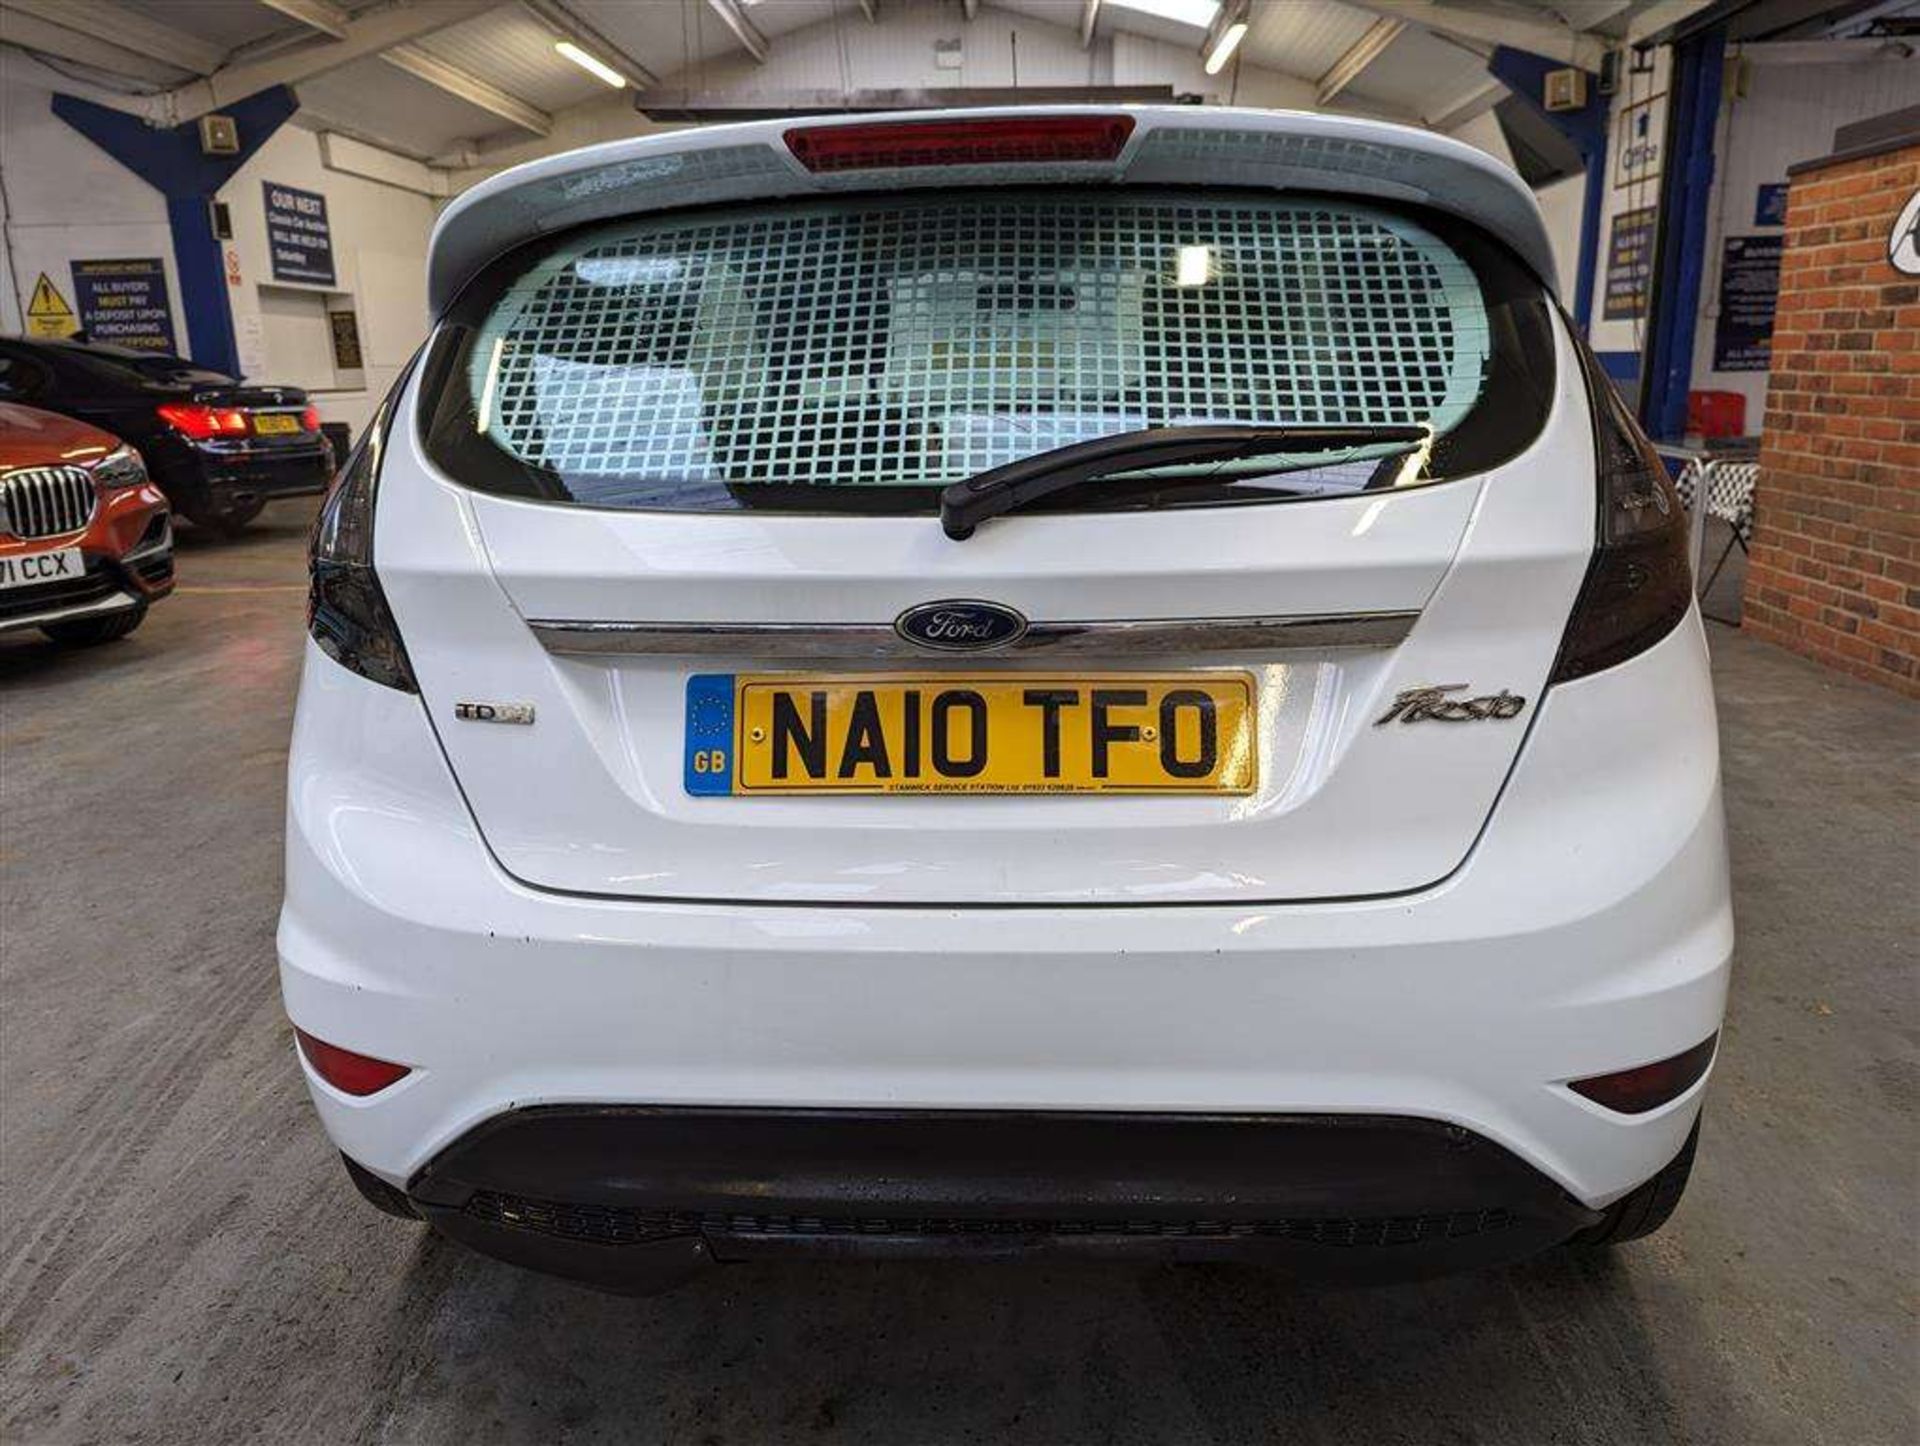 2010 FORD FIESTA BASE TDCI 68 - Image 3 of 20